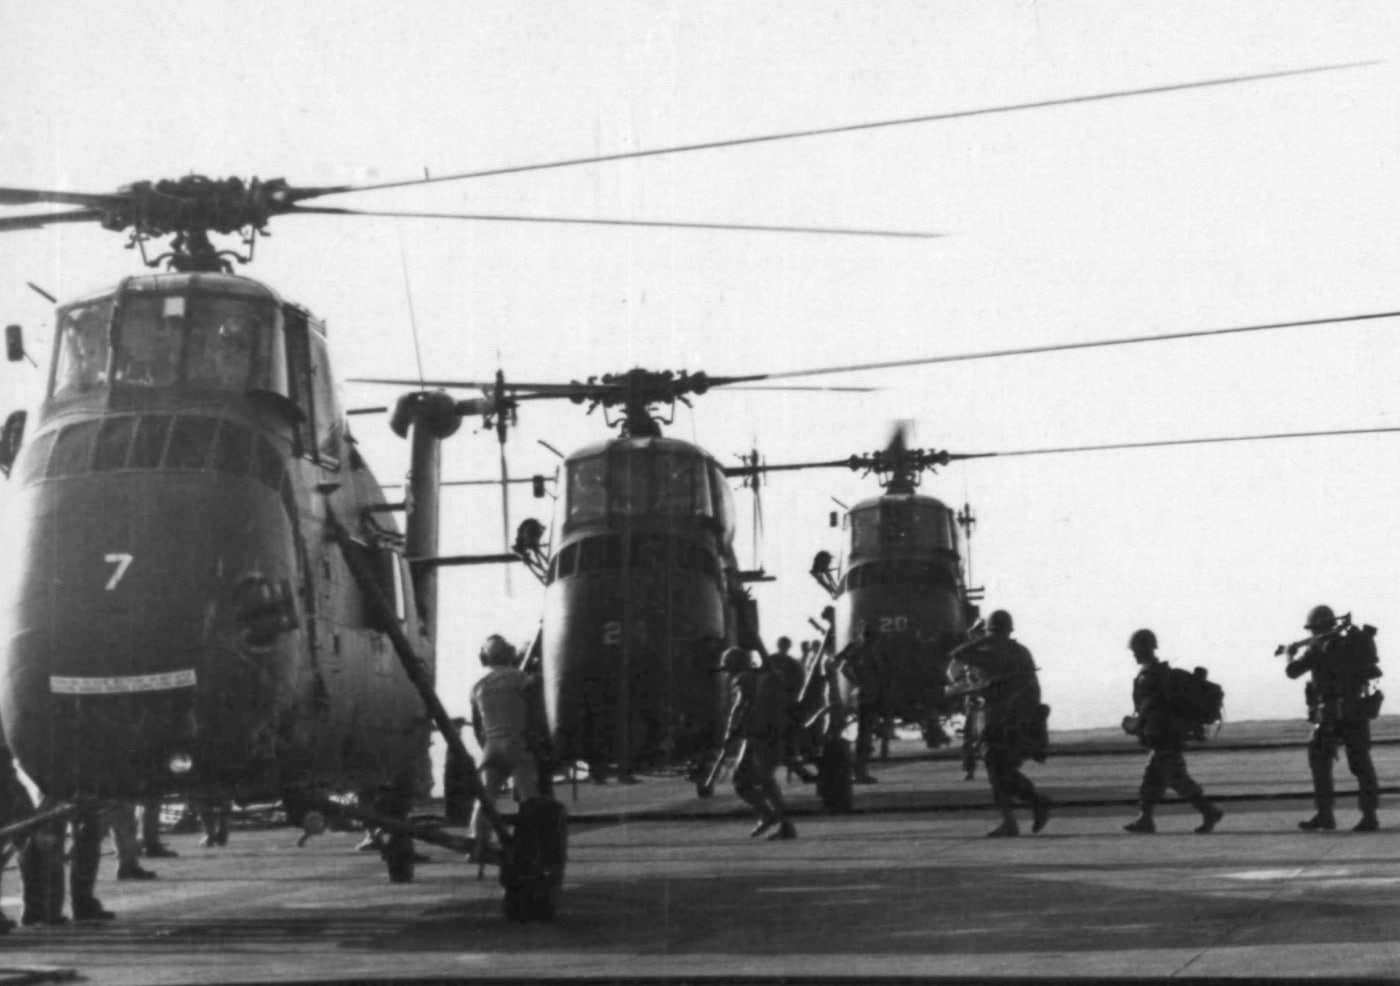 In this black and white photograph, American Marines load into CH-34D helicopters for Operation Kentucky against North Vietnam. The Army frequently used the UH-1 and Chinook helicopters in Vietnam instead of the CH-34. The heat was said to be too much for the H-34 engines. However, the H-34 remained in service with the U.S. Marines and the South Vietnamese Air Force. The helicopters also saw service in other hot climates such as with the French during the war in Algeria. 